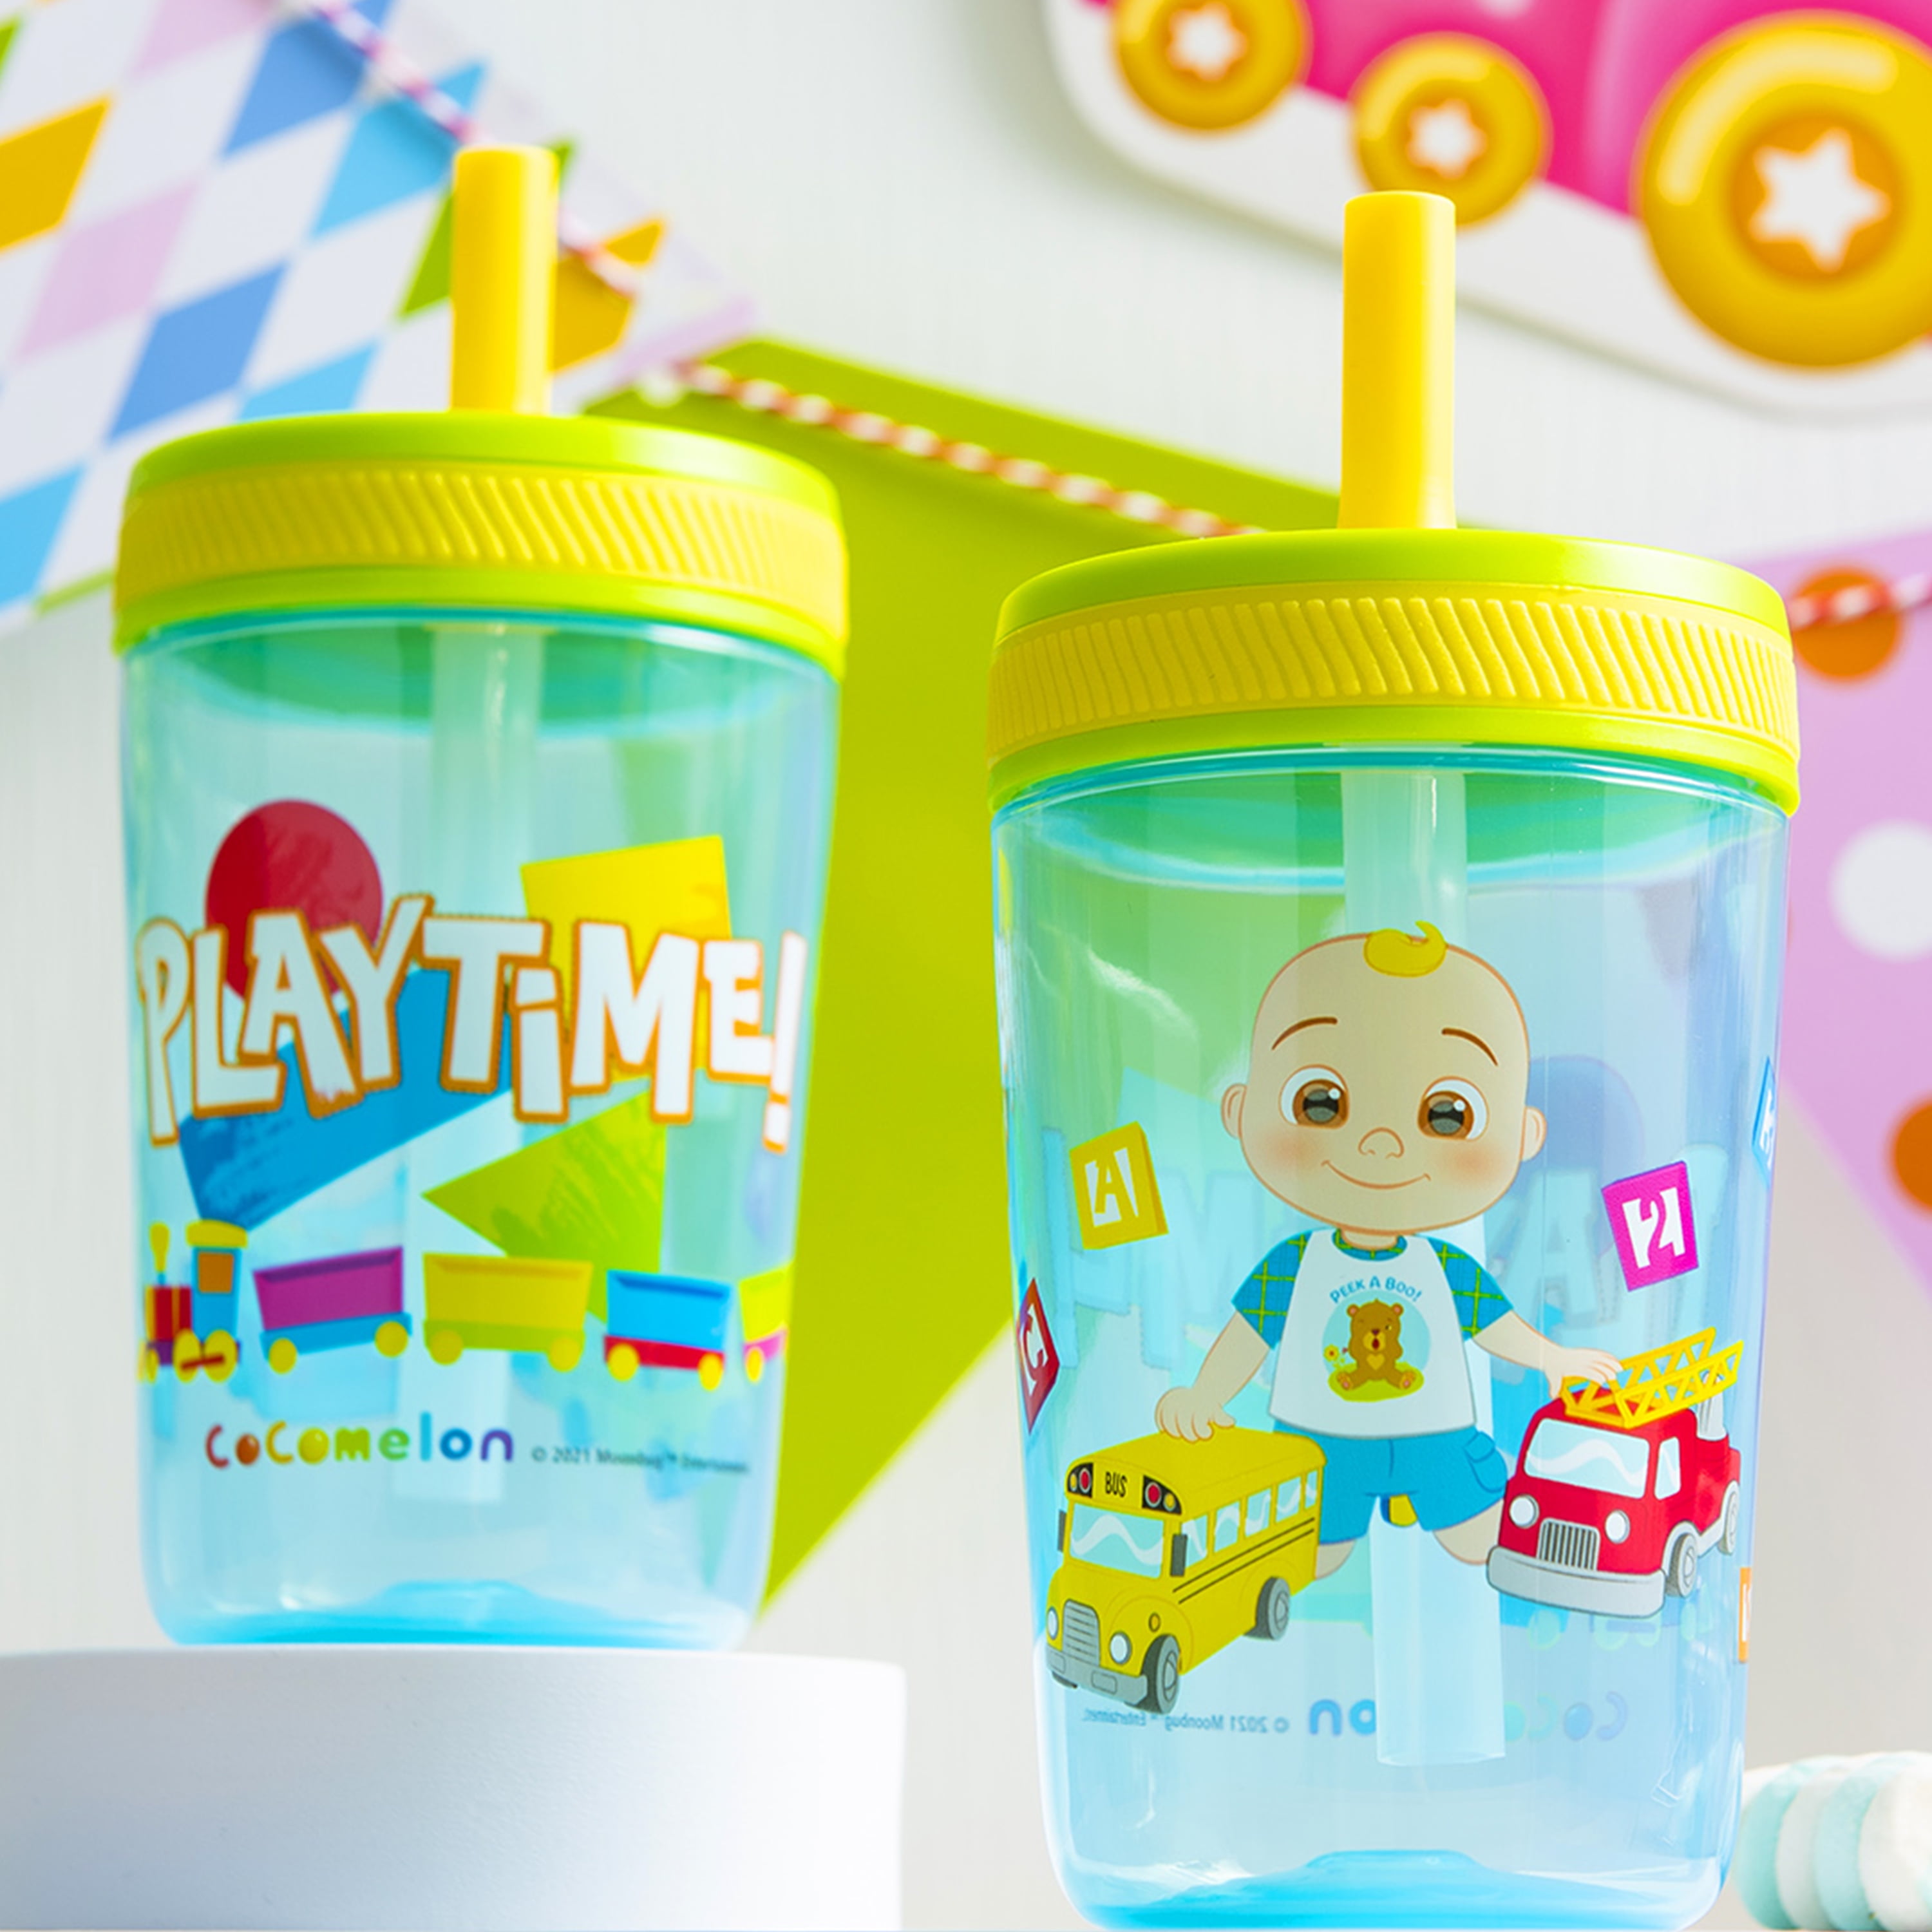 Toy Story Fun Floats Tumbler Cup with Lid and Straw by Zak Designs – Bling  Your Cake